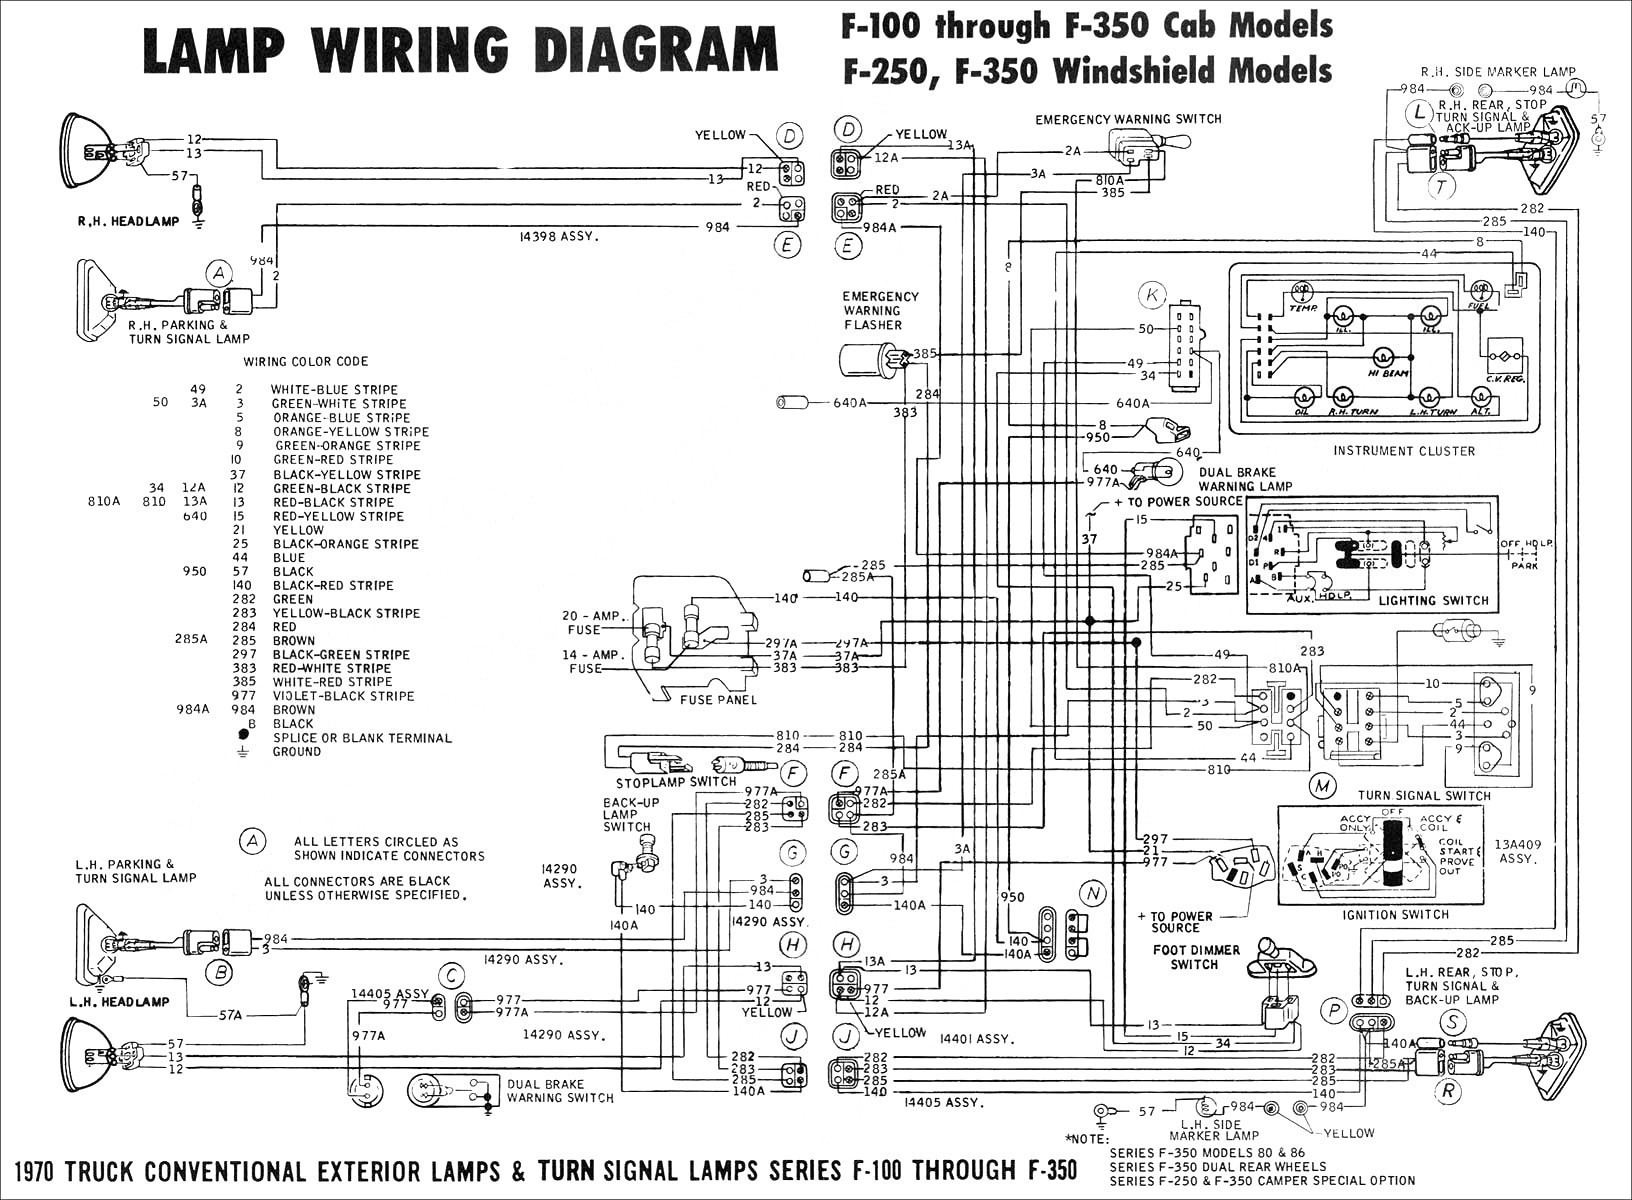 2005 Mustang Engine Diagram 2005 ford Gt Archives Simple Wiring Diagram